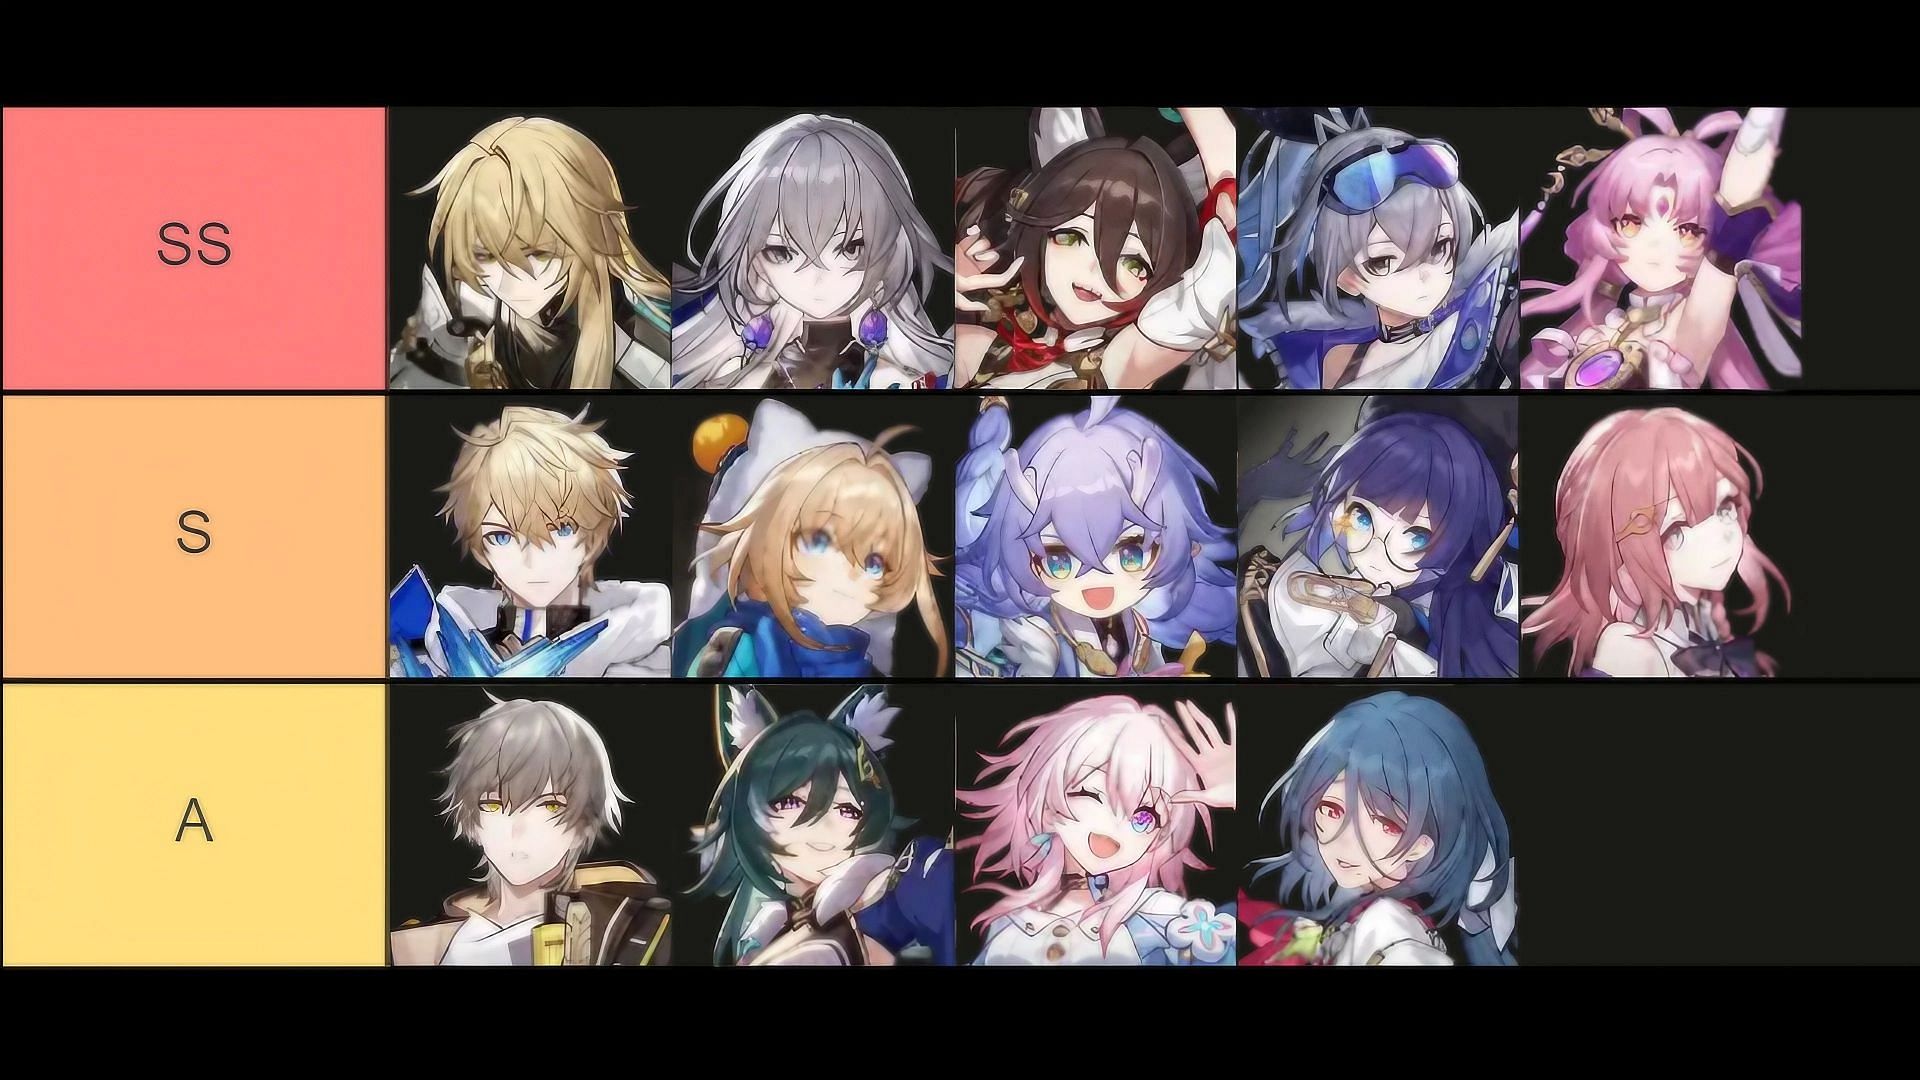 Support character tier list for Honkai Star Rail 1.4